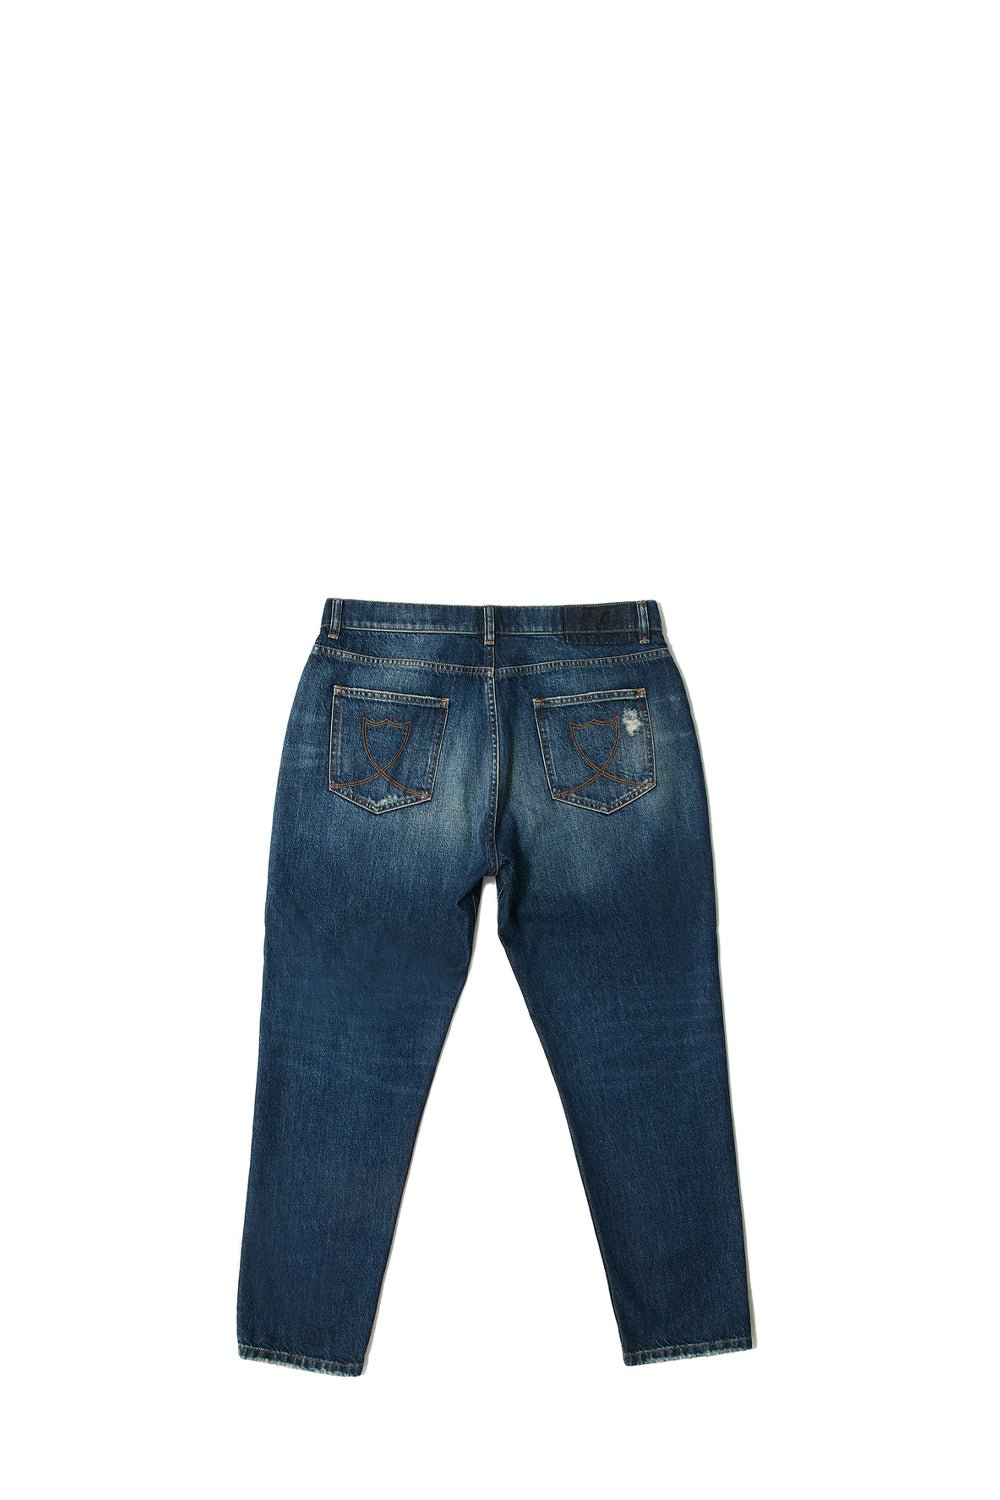 LOOSE BLU Loose fit jeans, 5 pockets, hidden front button closure. 100% cotton. Made in Italy. HTC LOS ANGELES